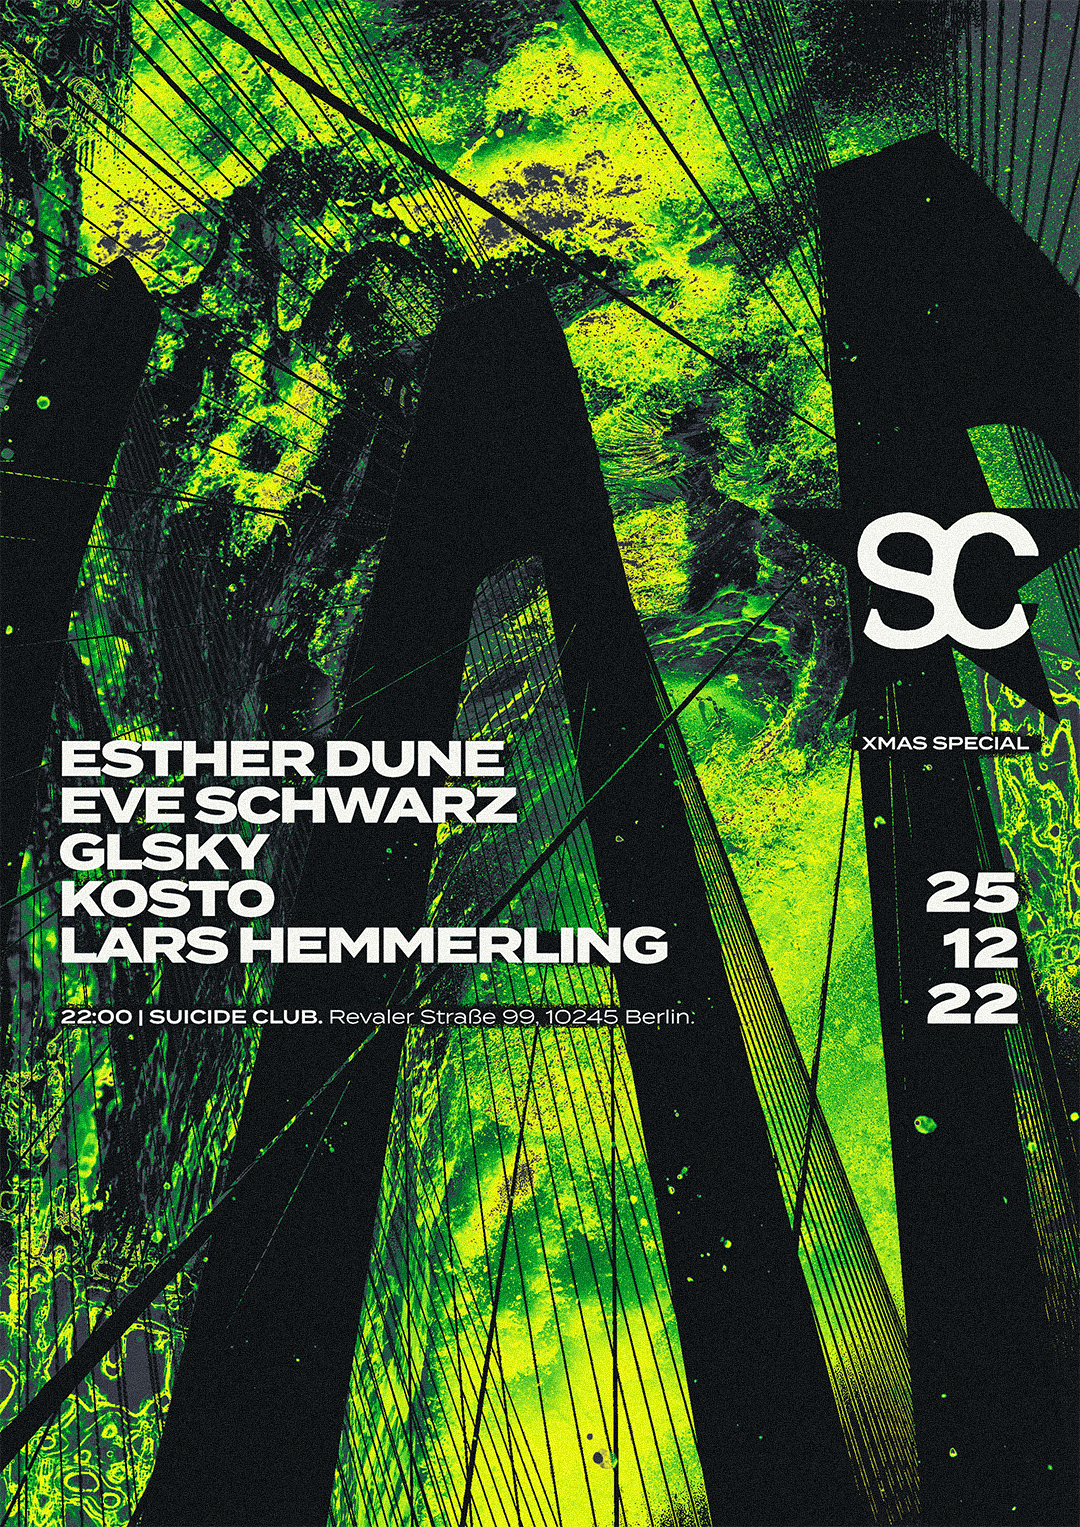 SCB || CLUB NIGHT - CHRISTMAS SPECIAL w/ Esther Dune, Lars Hemmerling, Eve Schwarz - フライヤー表